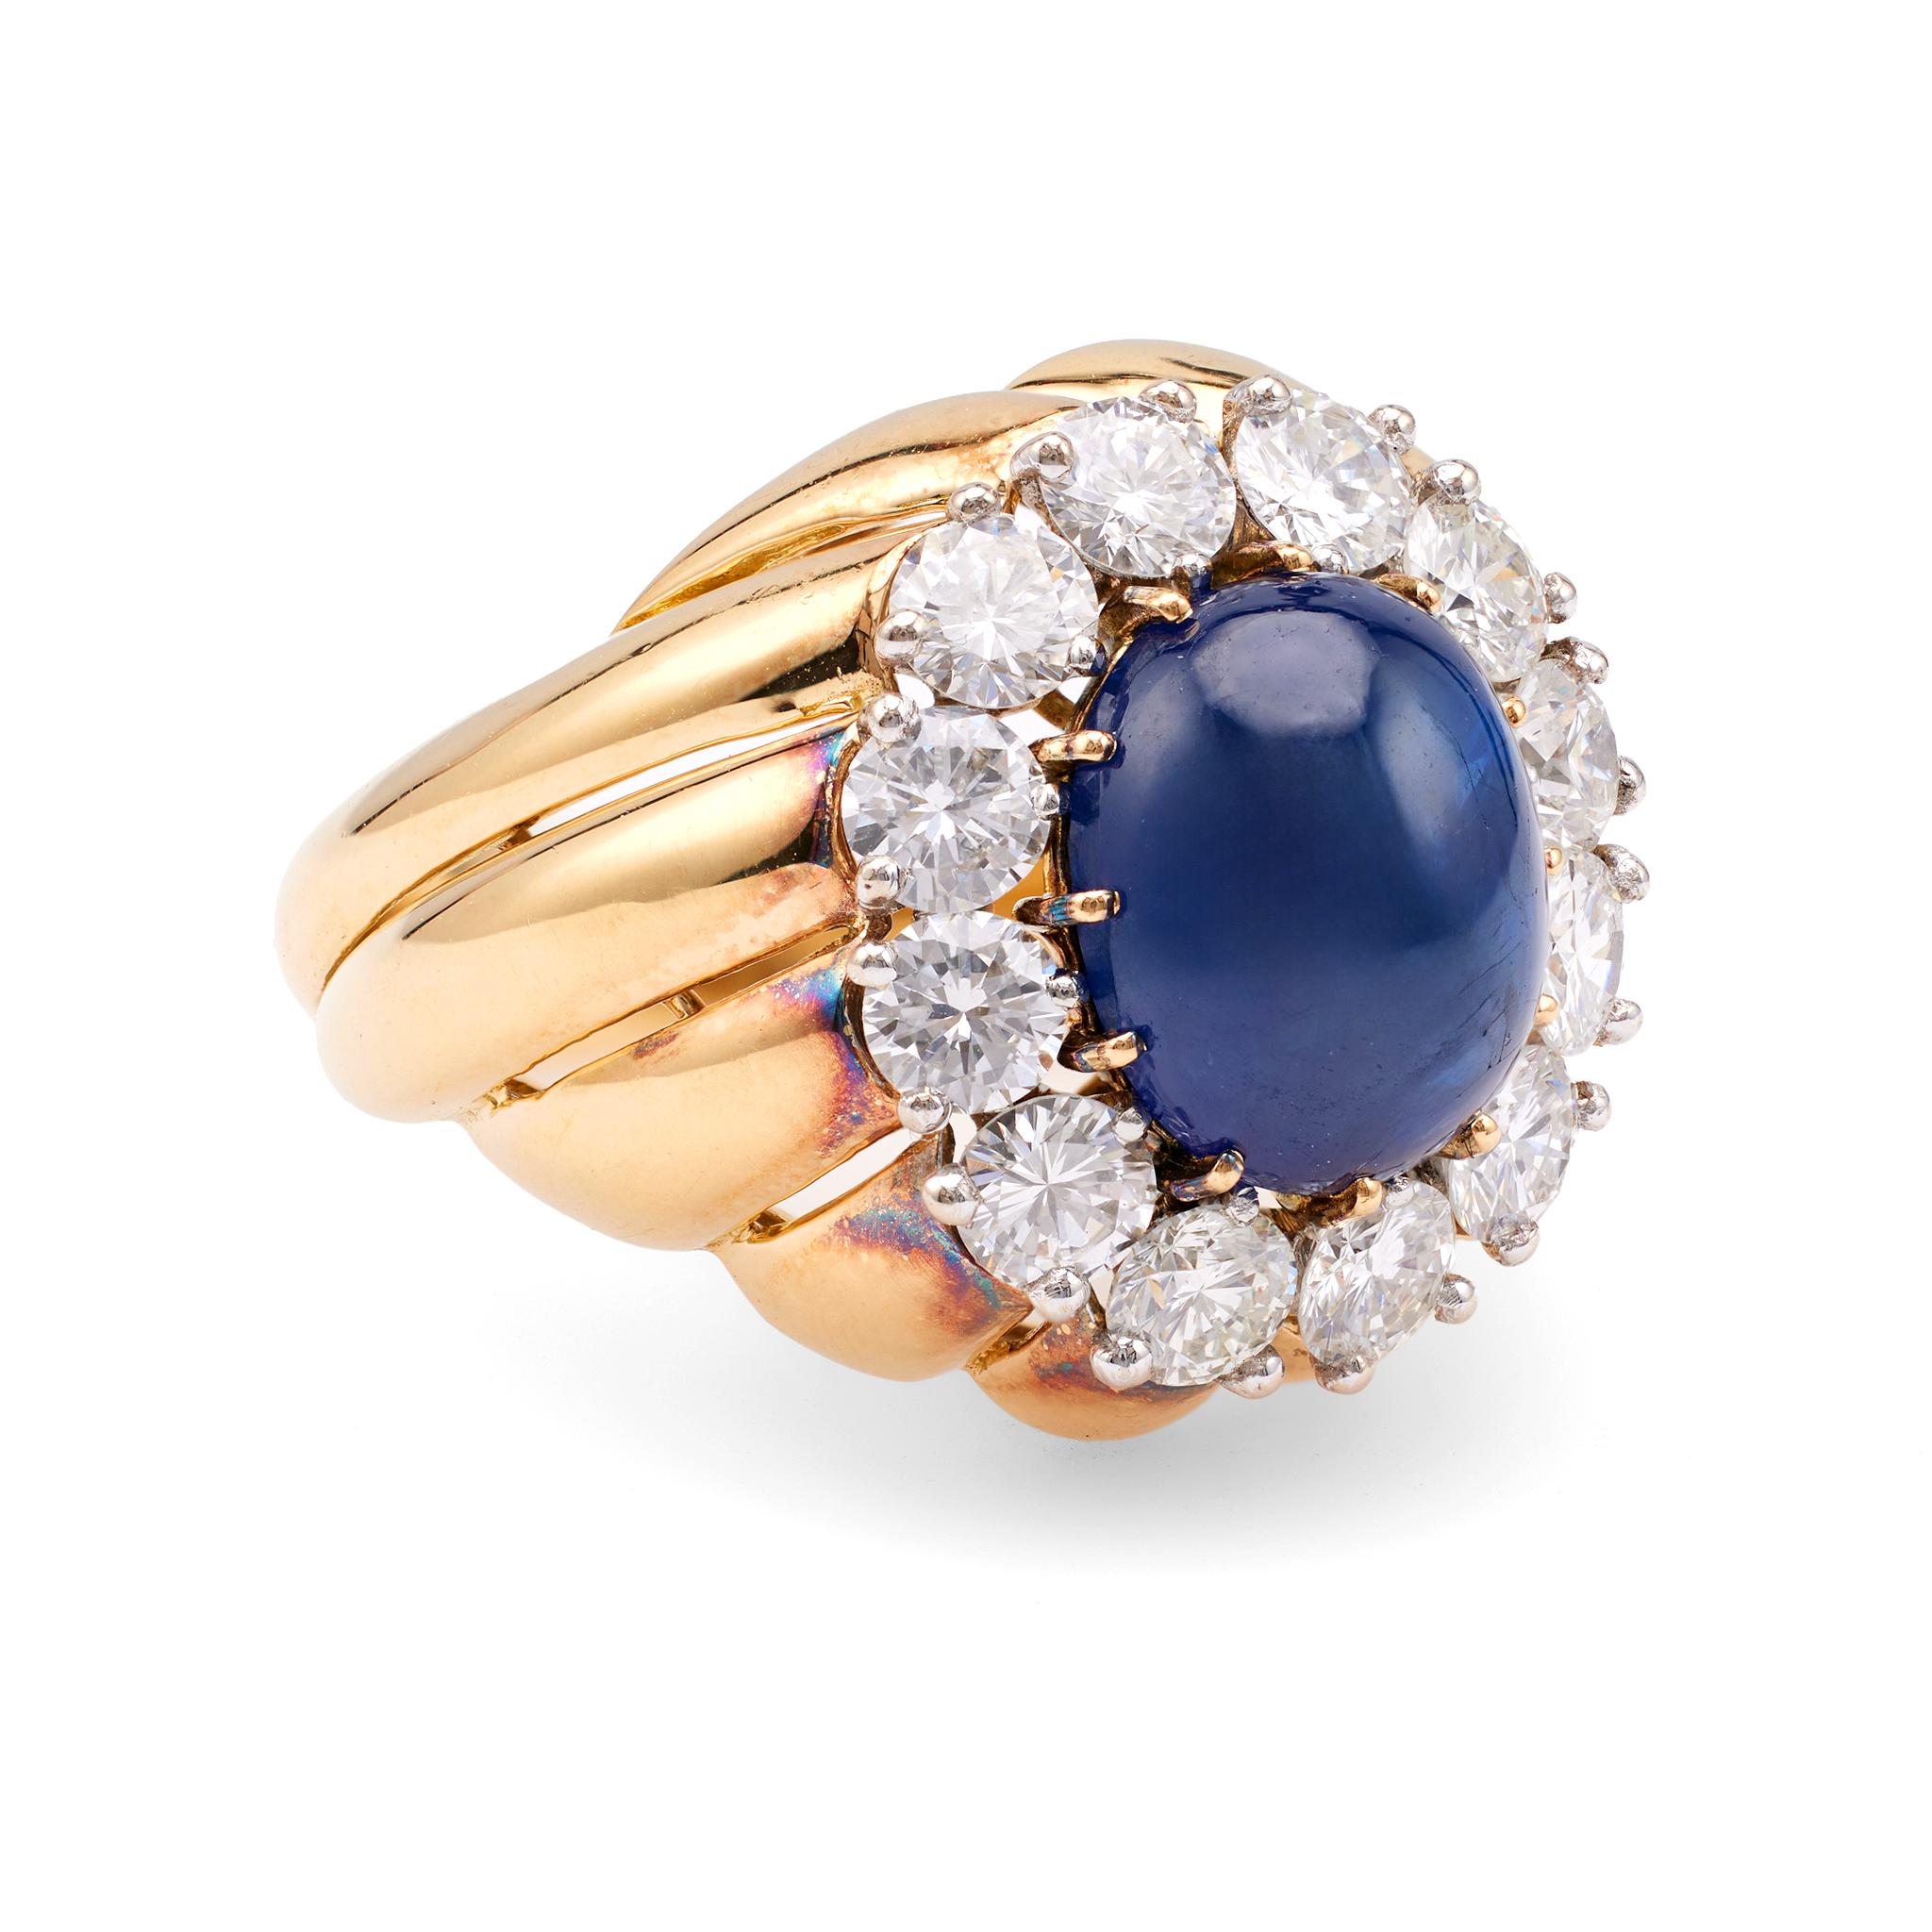 Vintage Van Cleef & Arpels GIA Burma No Heat Sapphire Diamond 18k Yellow Gold Ri In Good Condition For Sale In Beverly Hills, CA